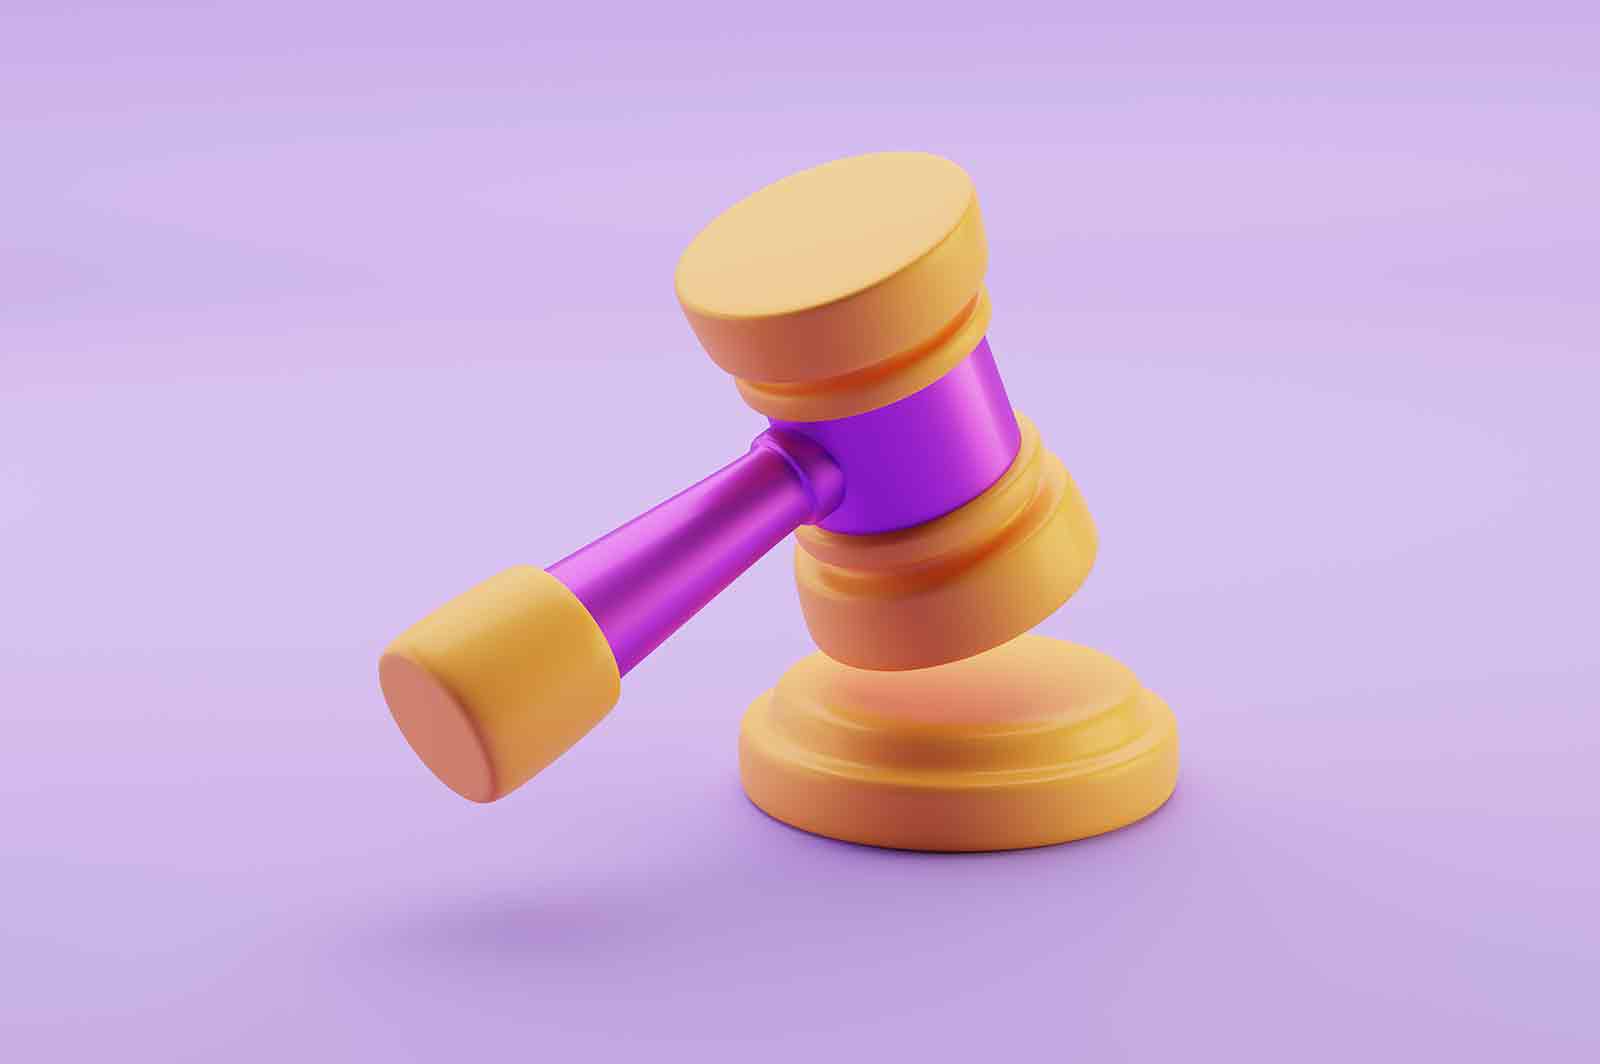 Auction hammer 3d rendered icon illustration. Gavel for auction sales or court hearing, symbol of legislation authority